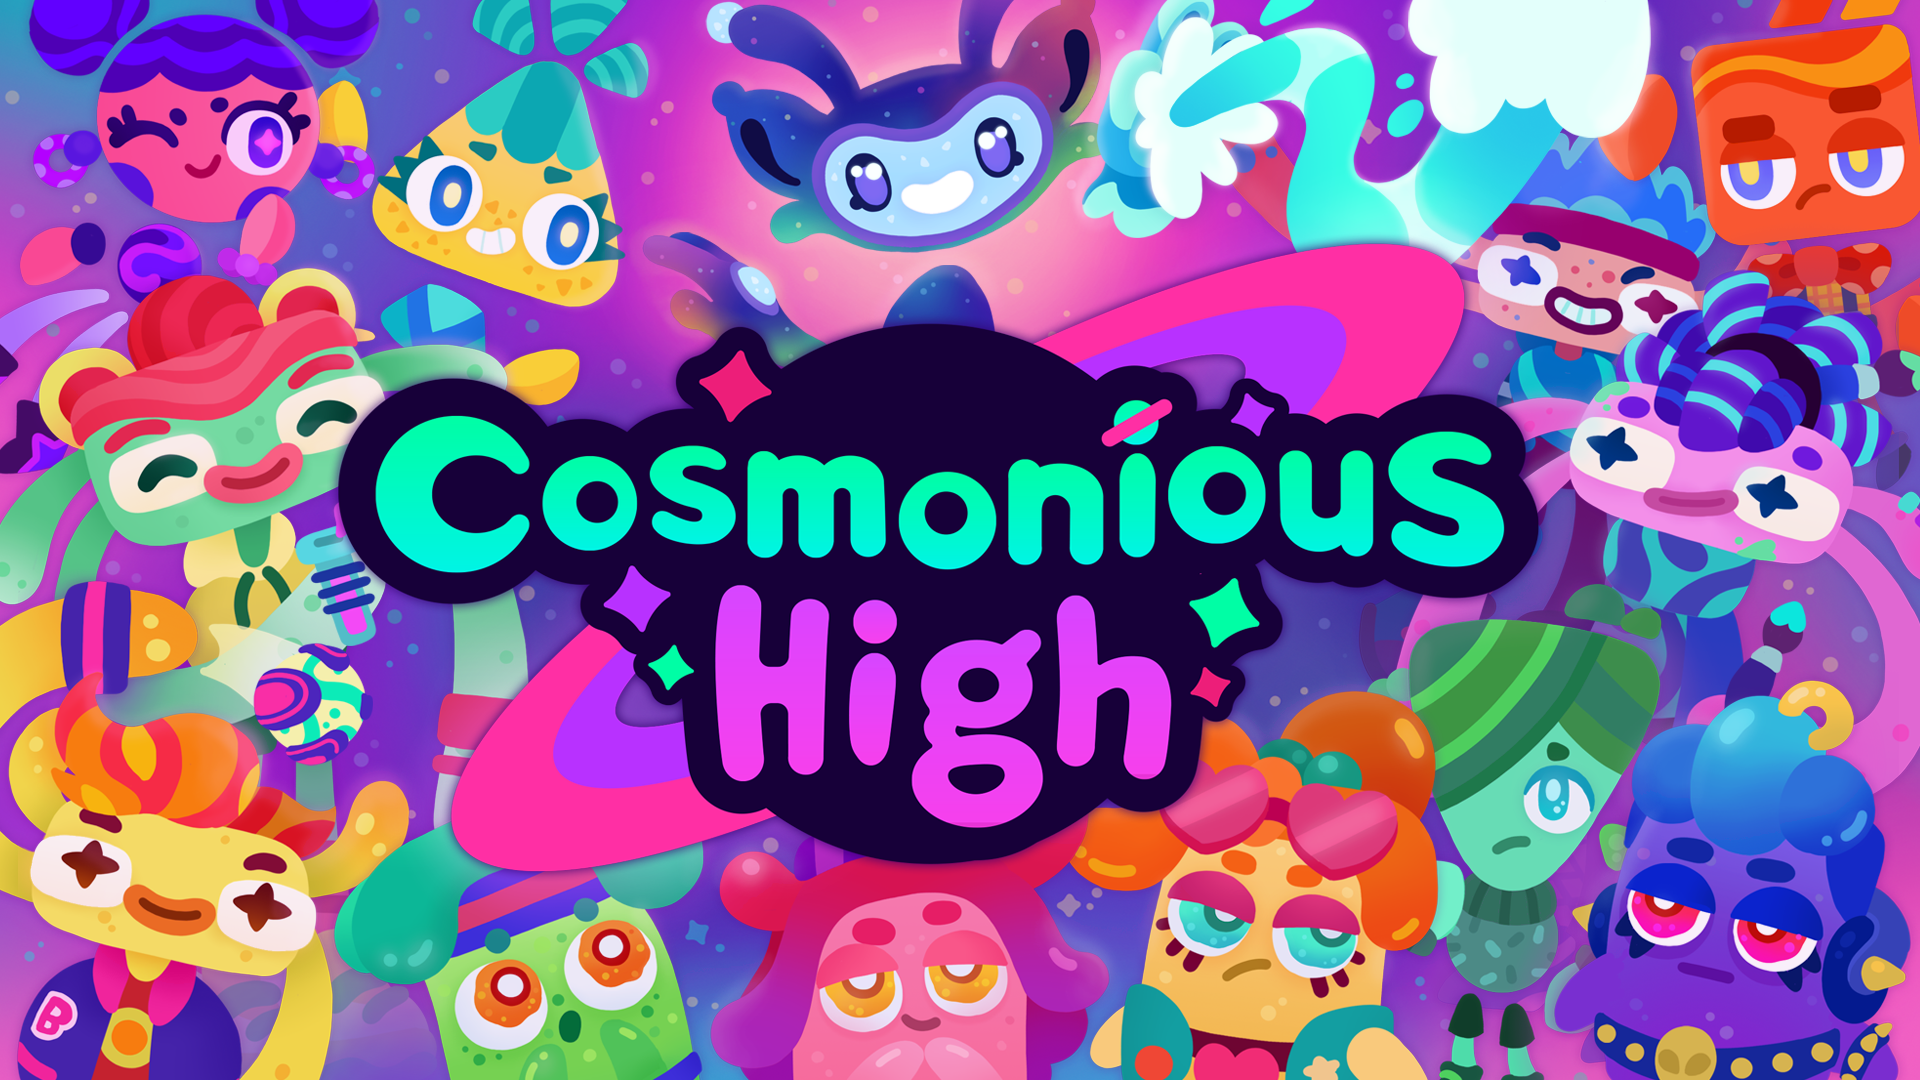 how much is cosmonious high